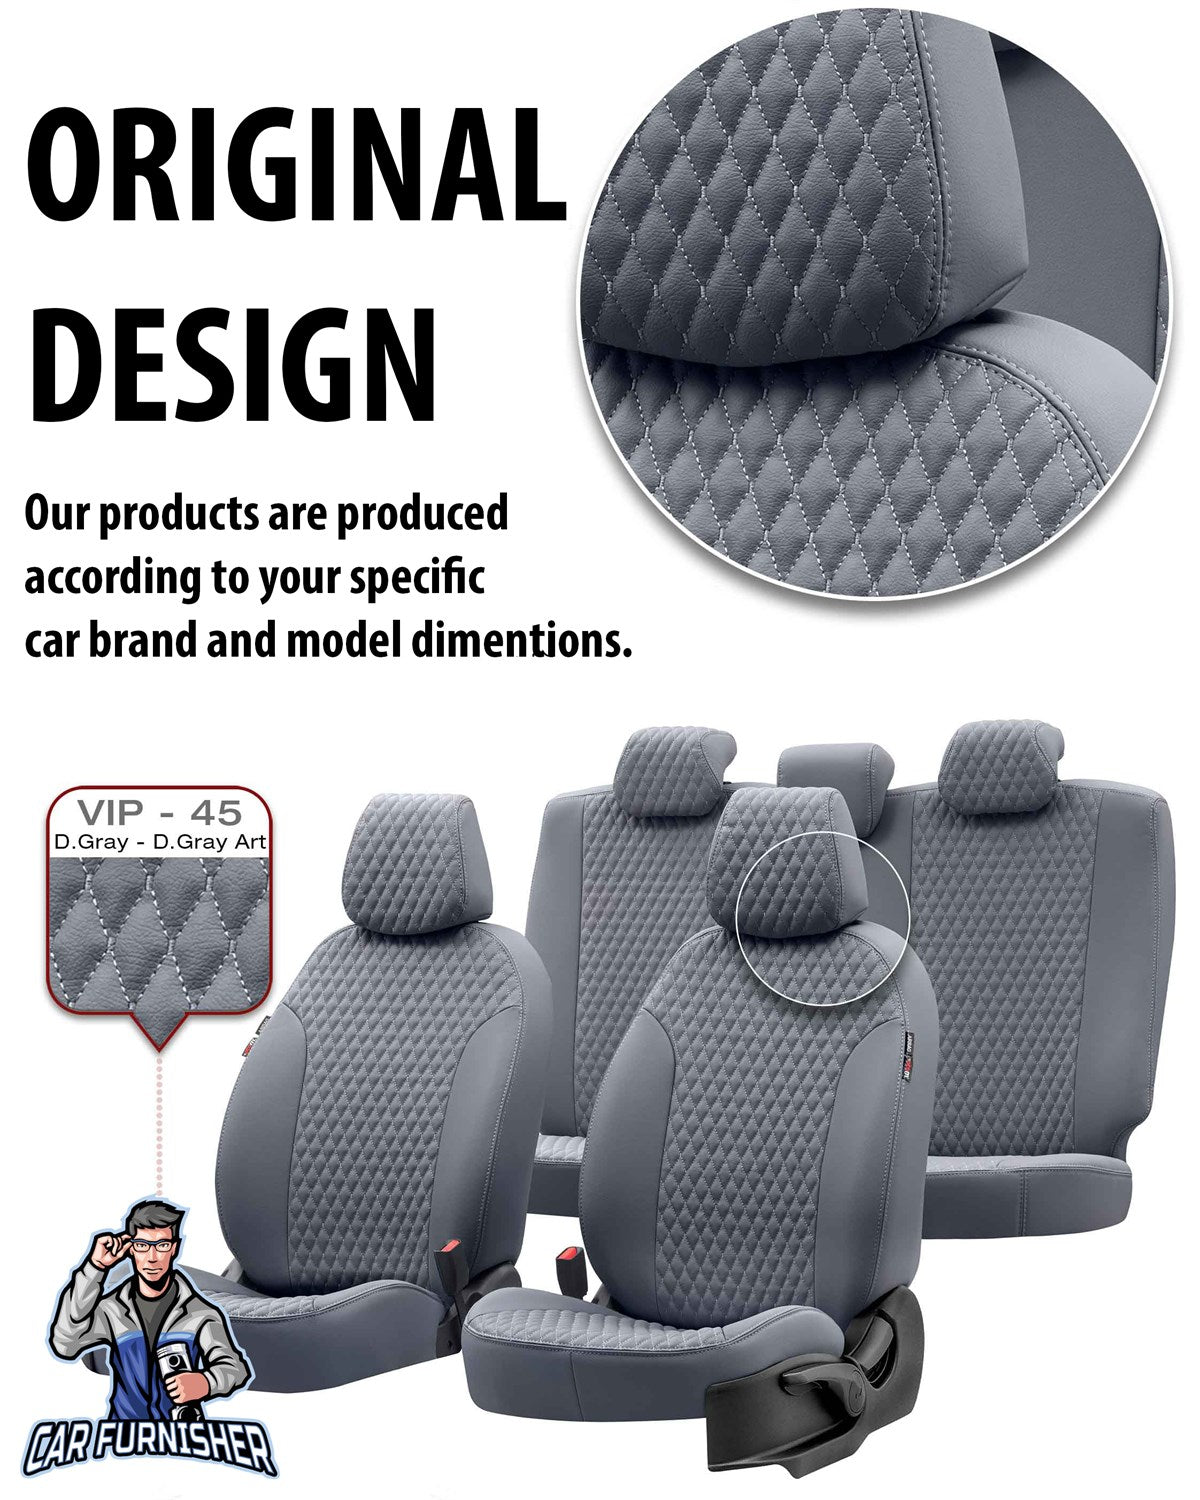 Mercedes Actros Seat Covers Amsterdam Leather Design Dark Gray Leather